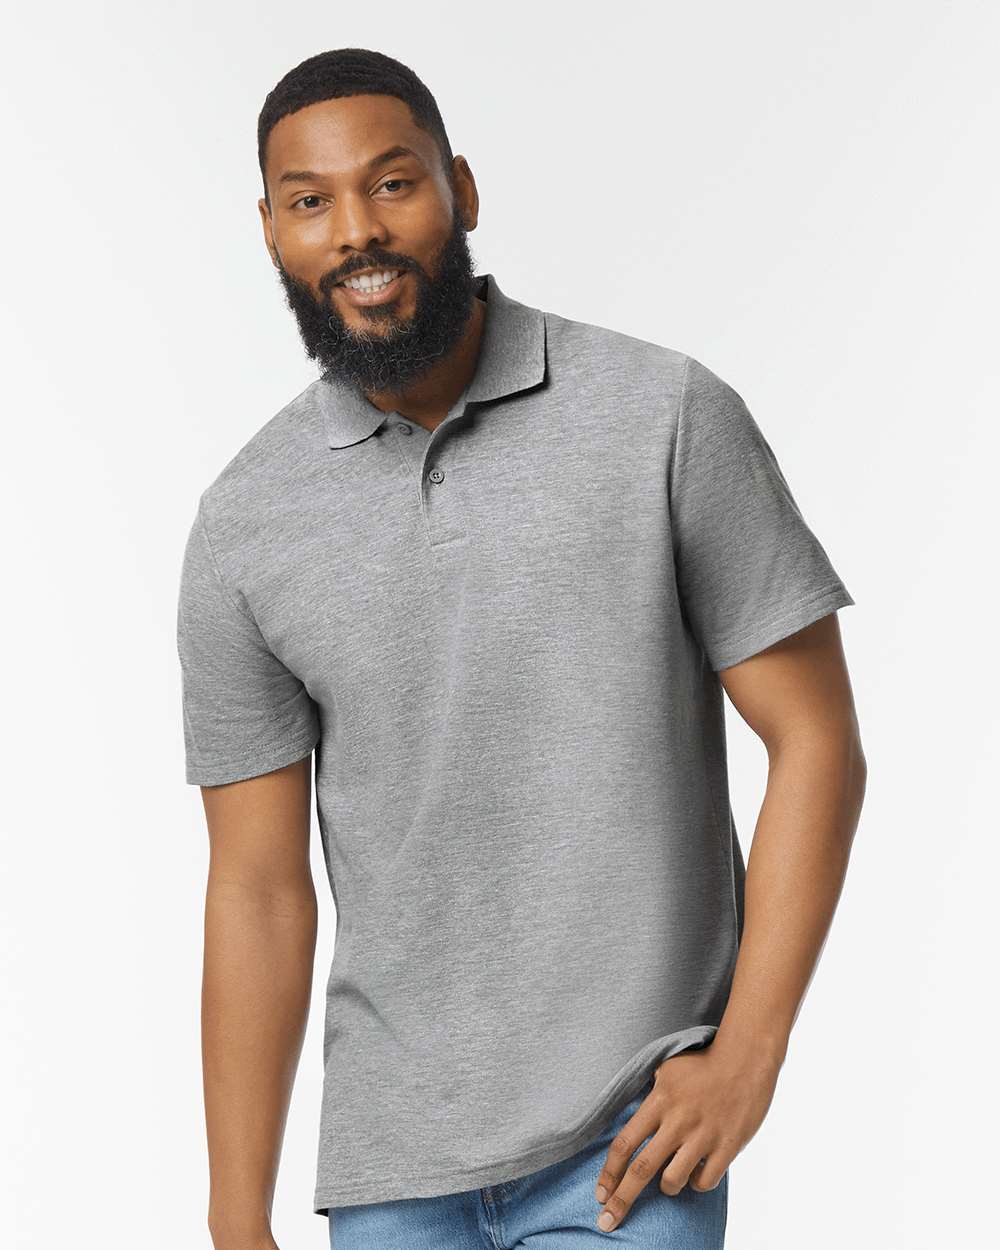 Gildan Softstyle® Adult Pique Polo 64800 #colormdl_Sport Grey